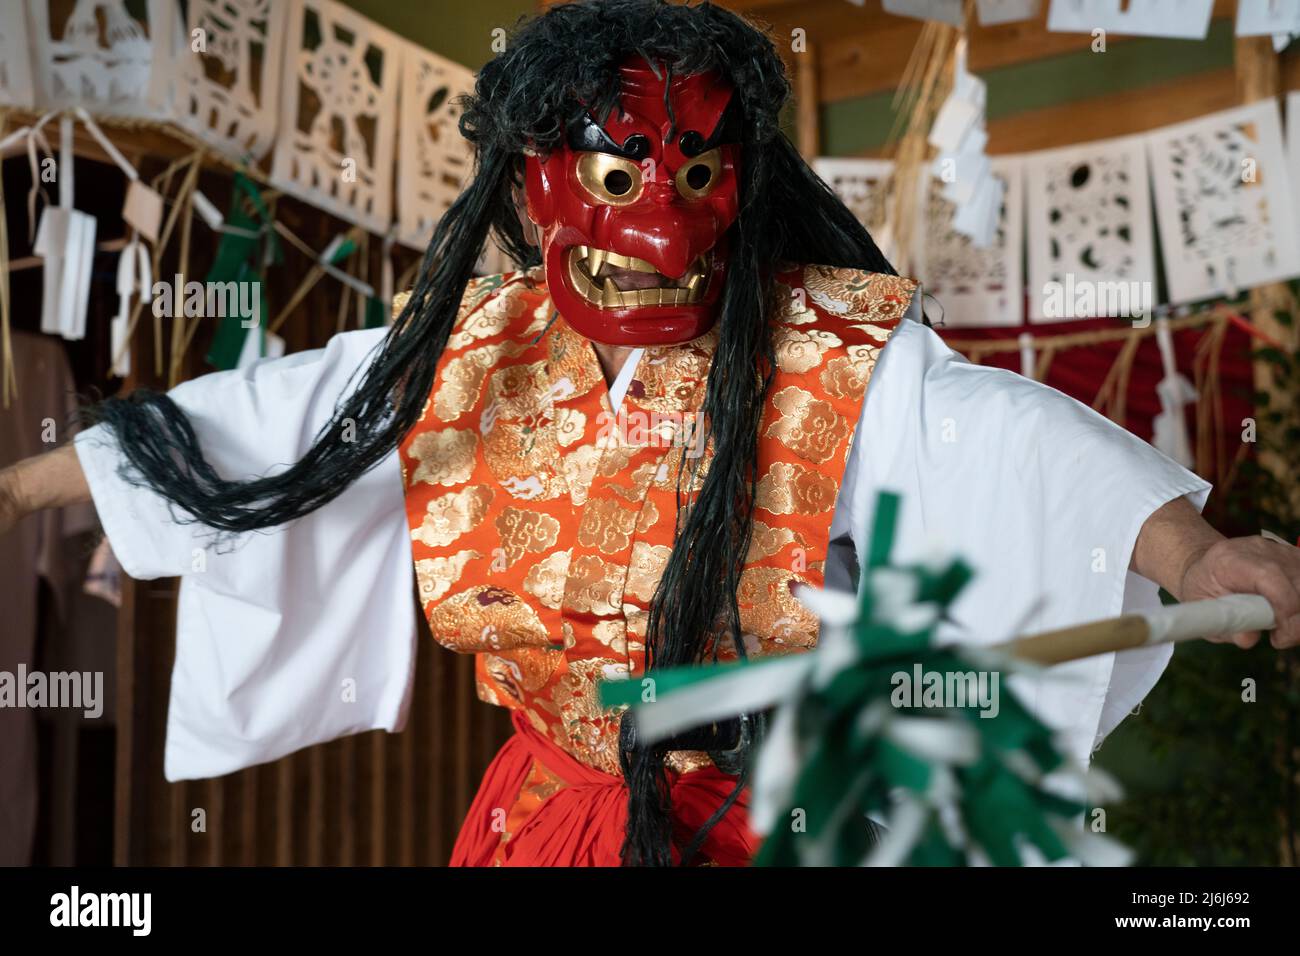 Fujisaki-san, a master of Kagura the Shinto ritual performance telling the stoires of the gods. Wearing the red mask of The Totori Dance. Takachiho, K Stock Photo